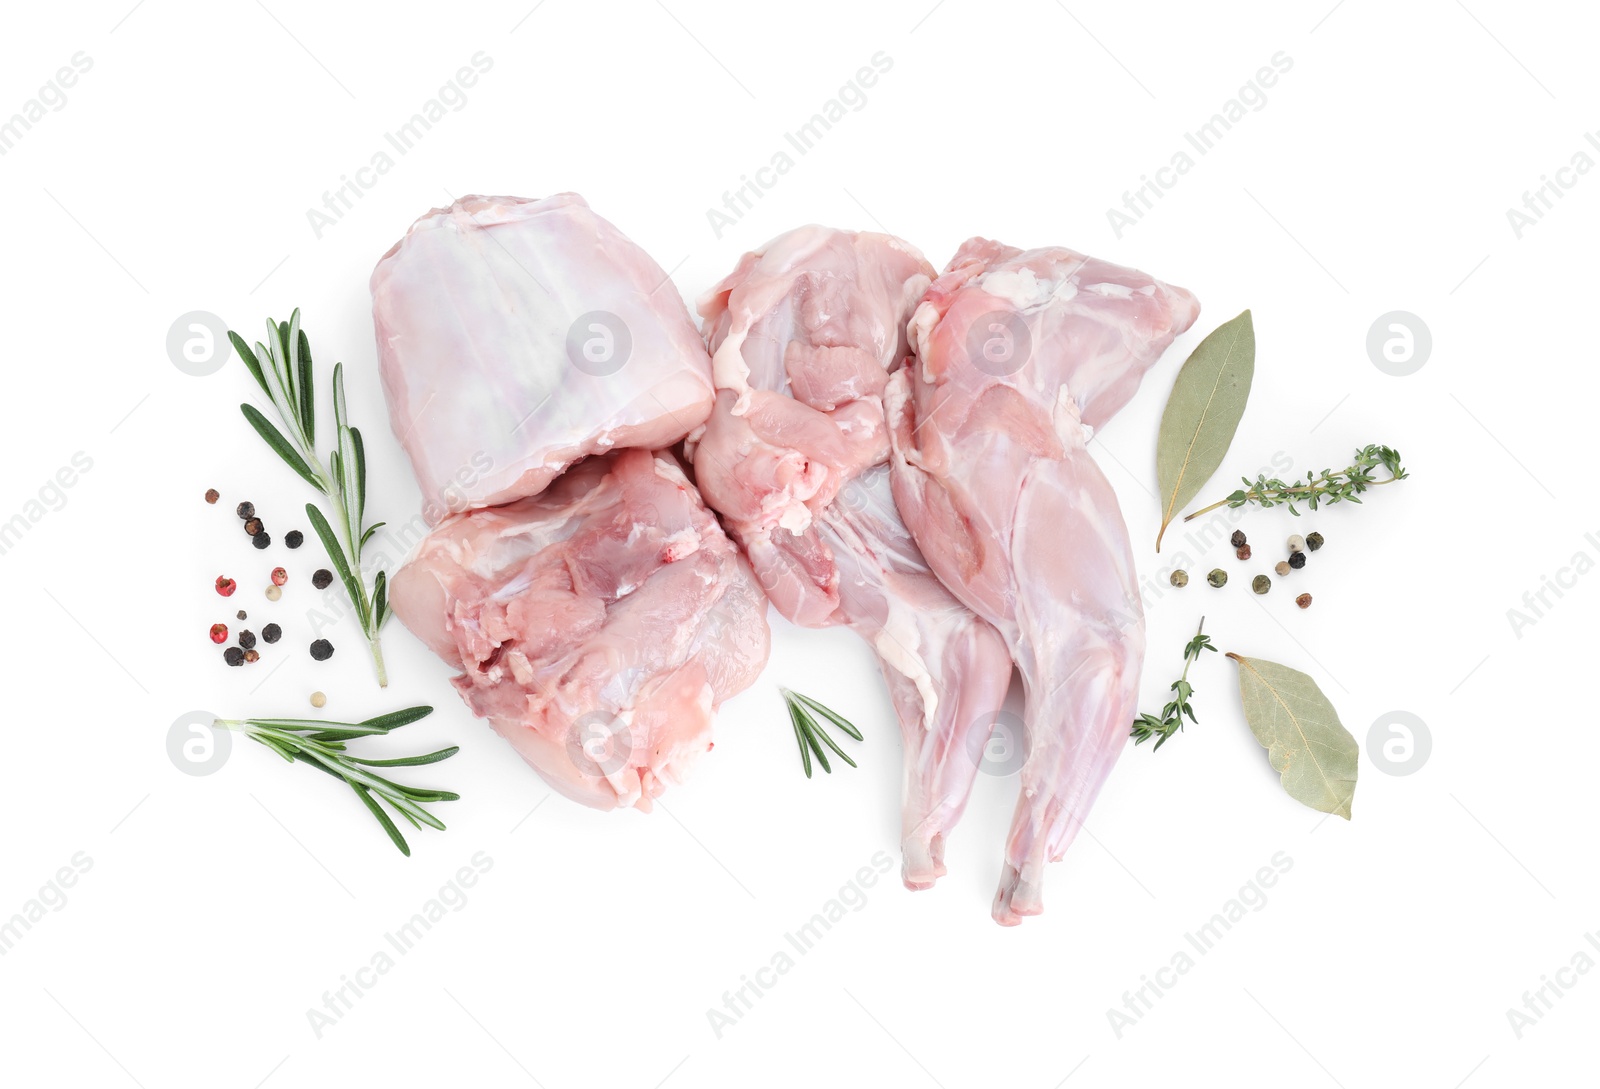 Photo of Fresh raw rabbit legs and spices isolated on white, top view